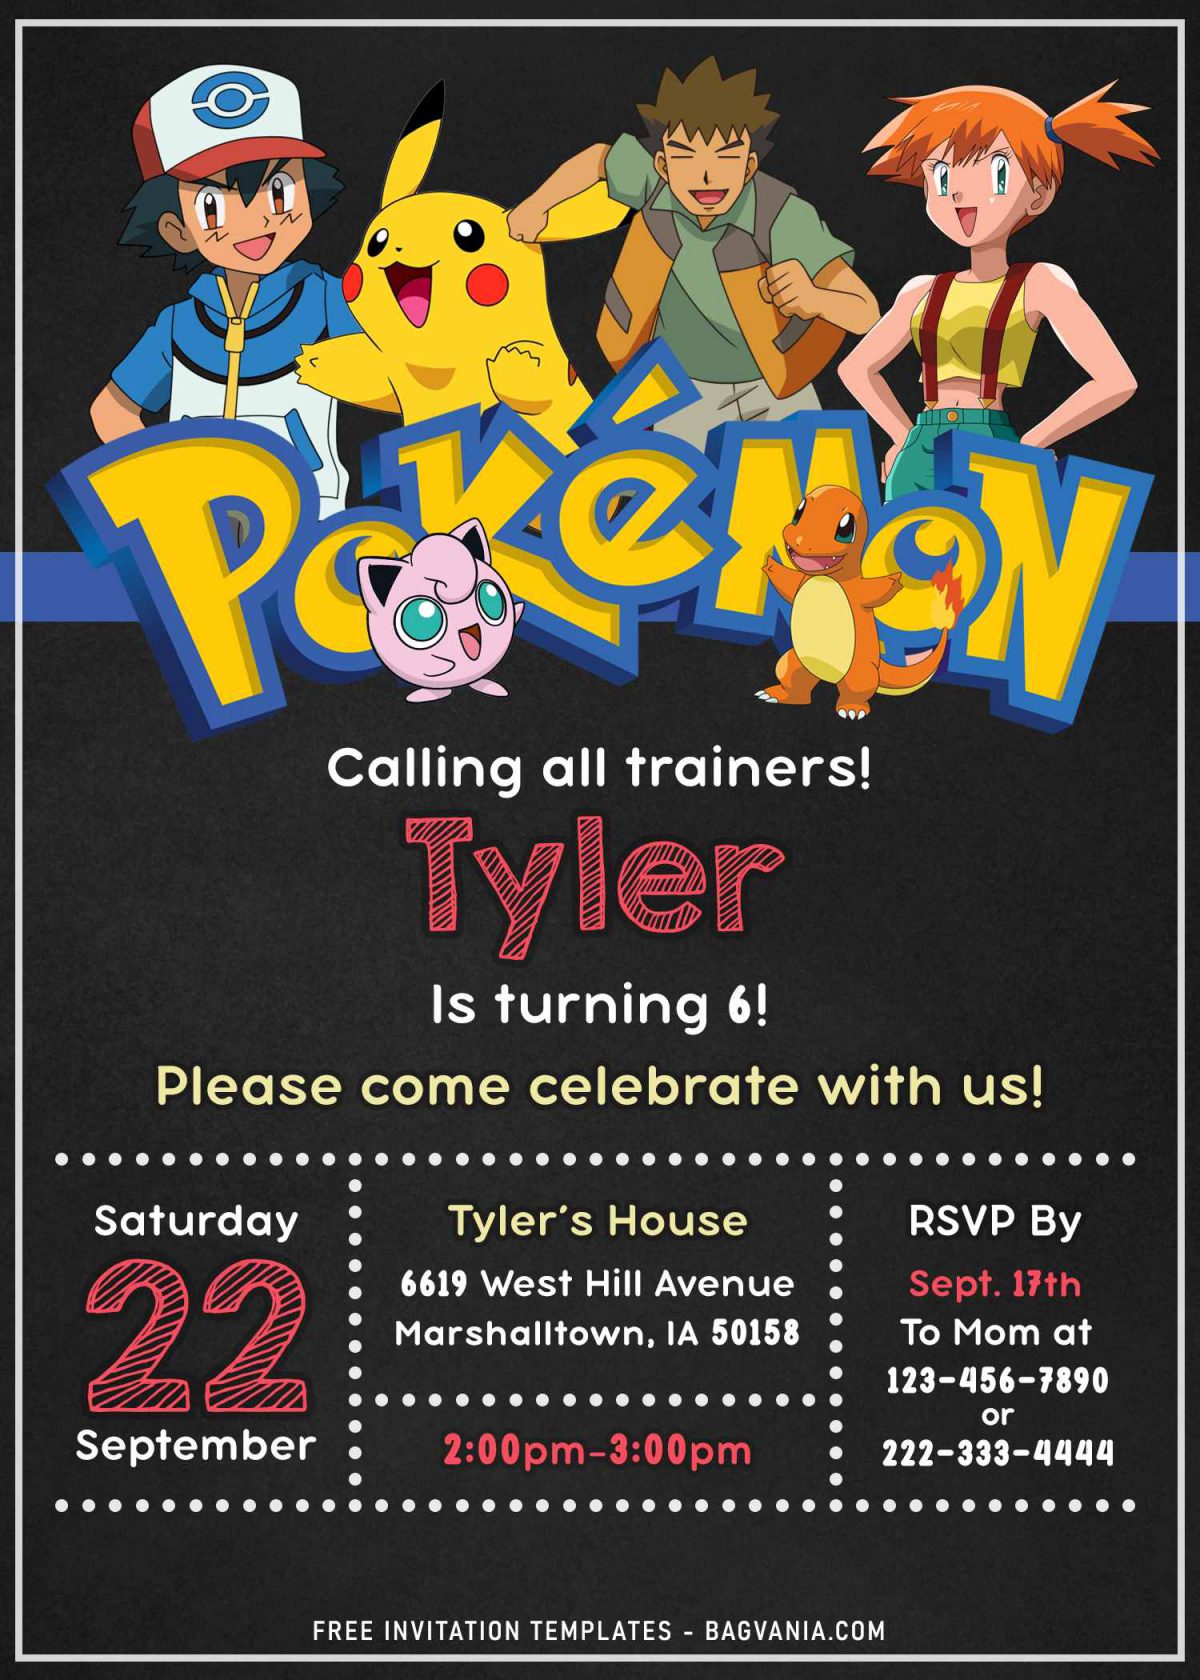 11+ Awesome Pokemon Chalkboard Invitation Templates For Boys Birthday Party